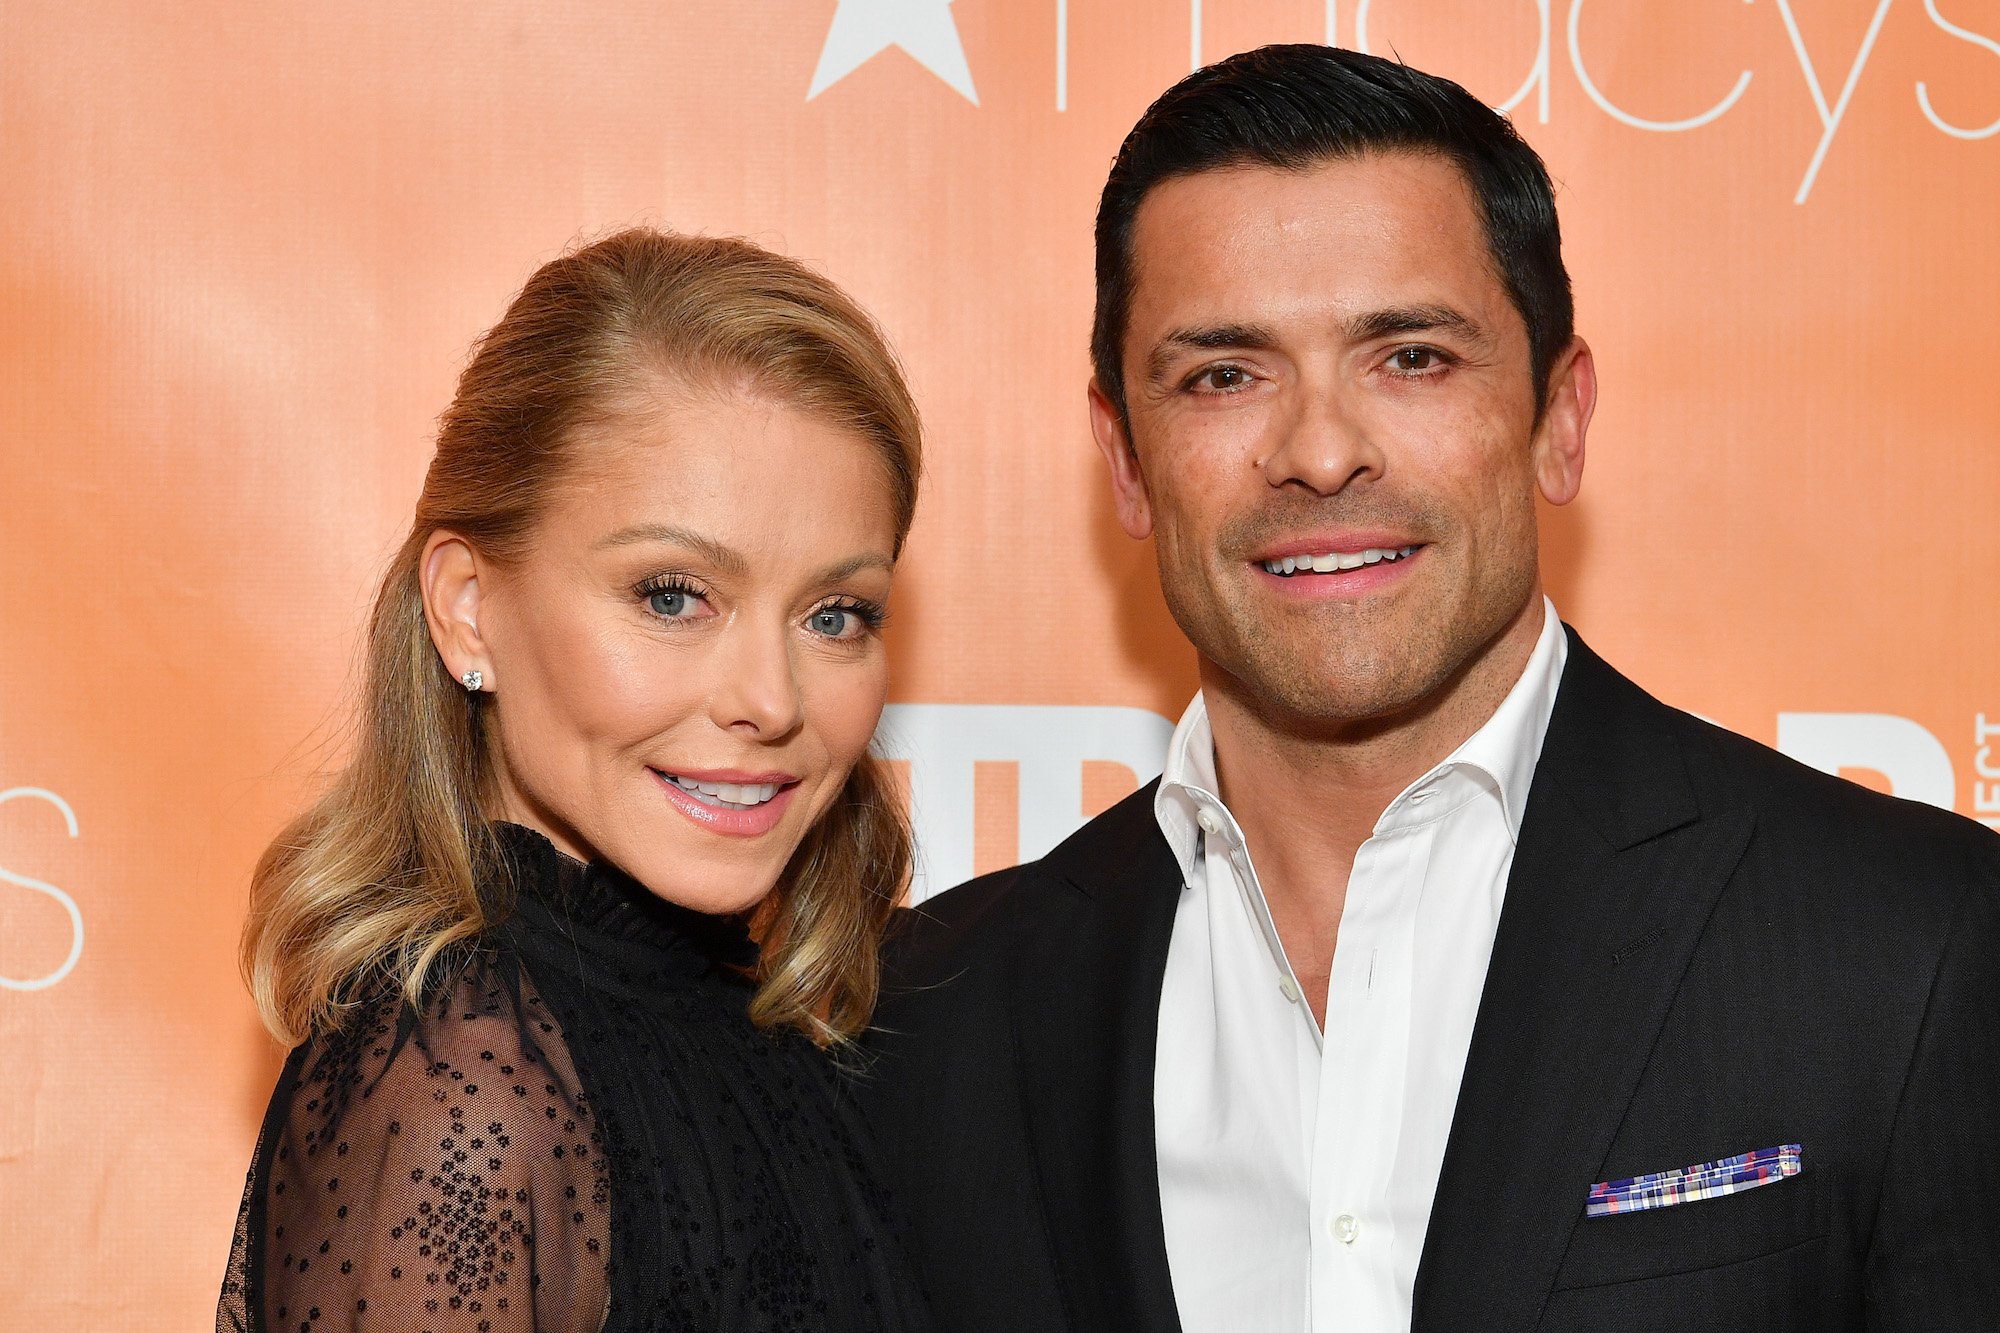 Kelly Ripa and Mark Consuelos posing together against an orange backdrop